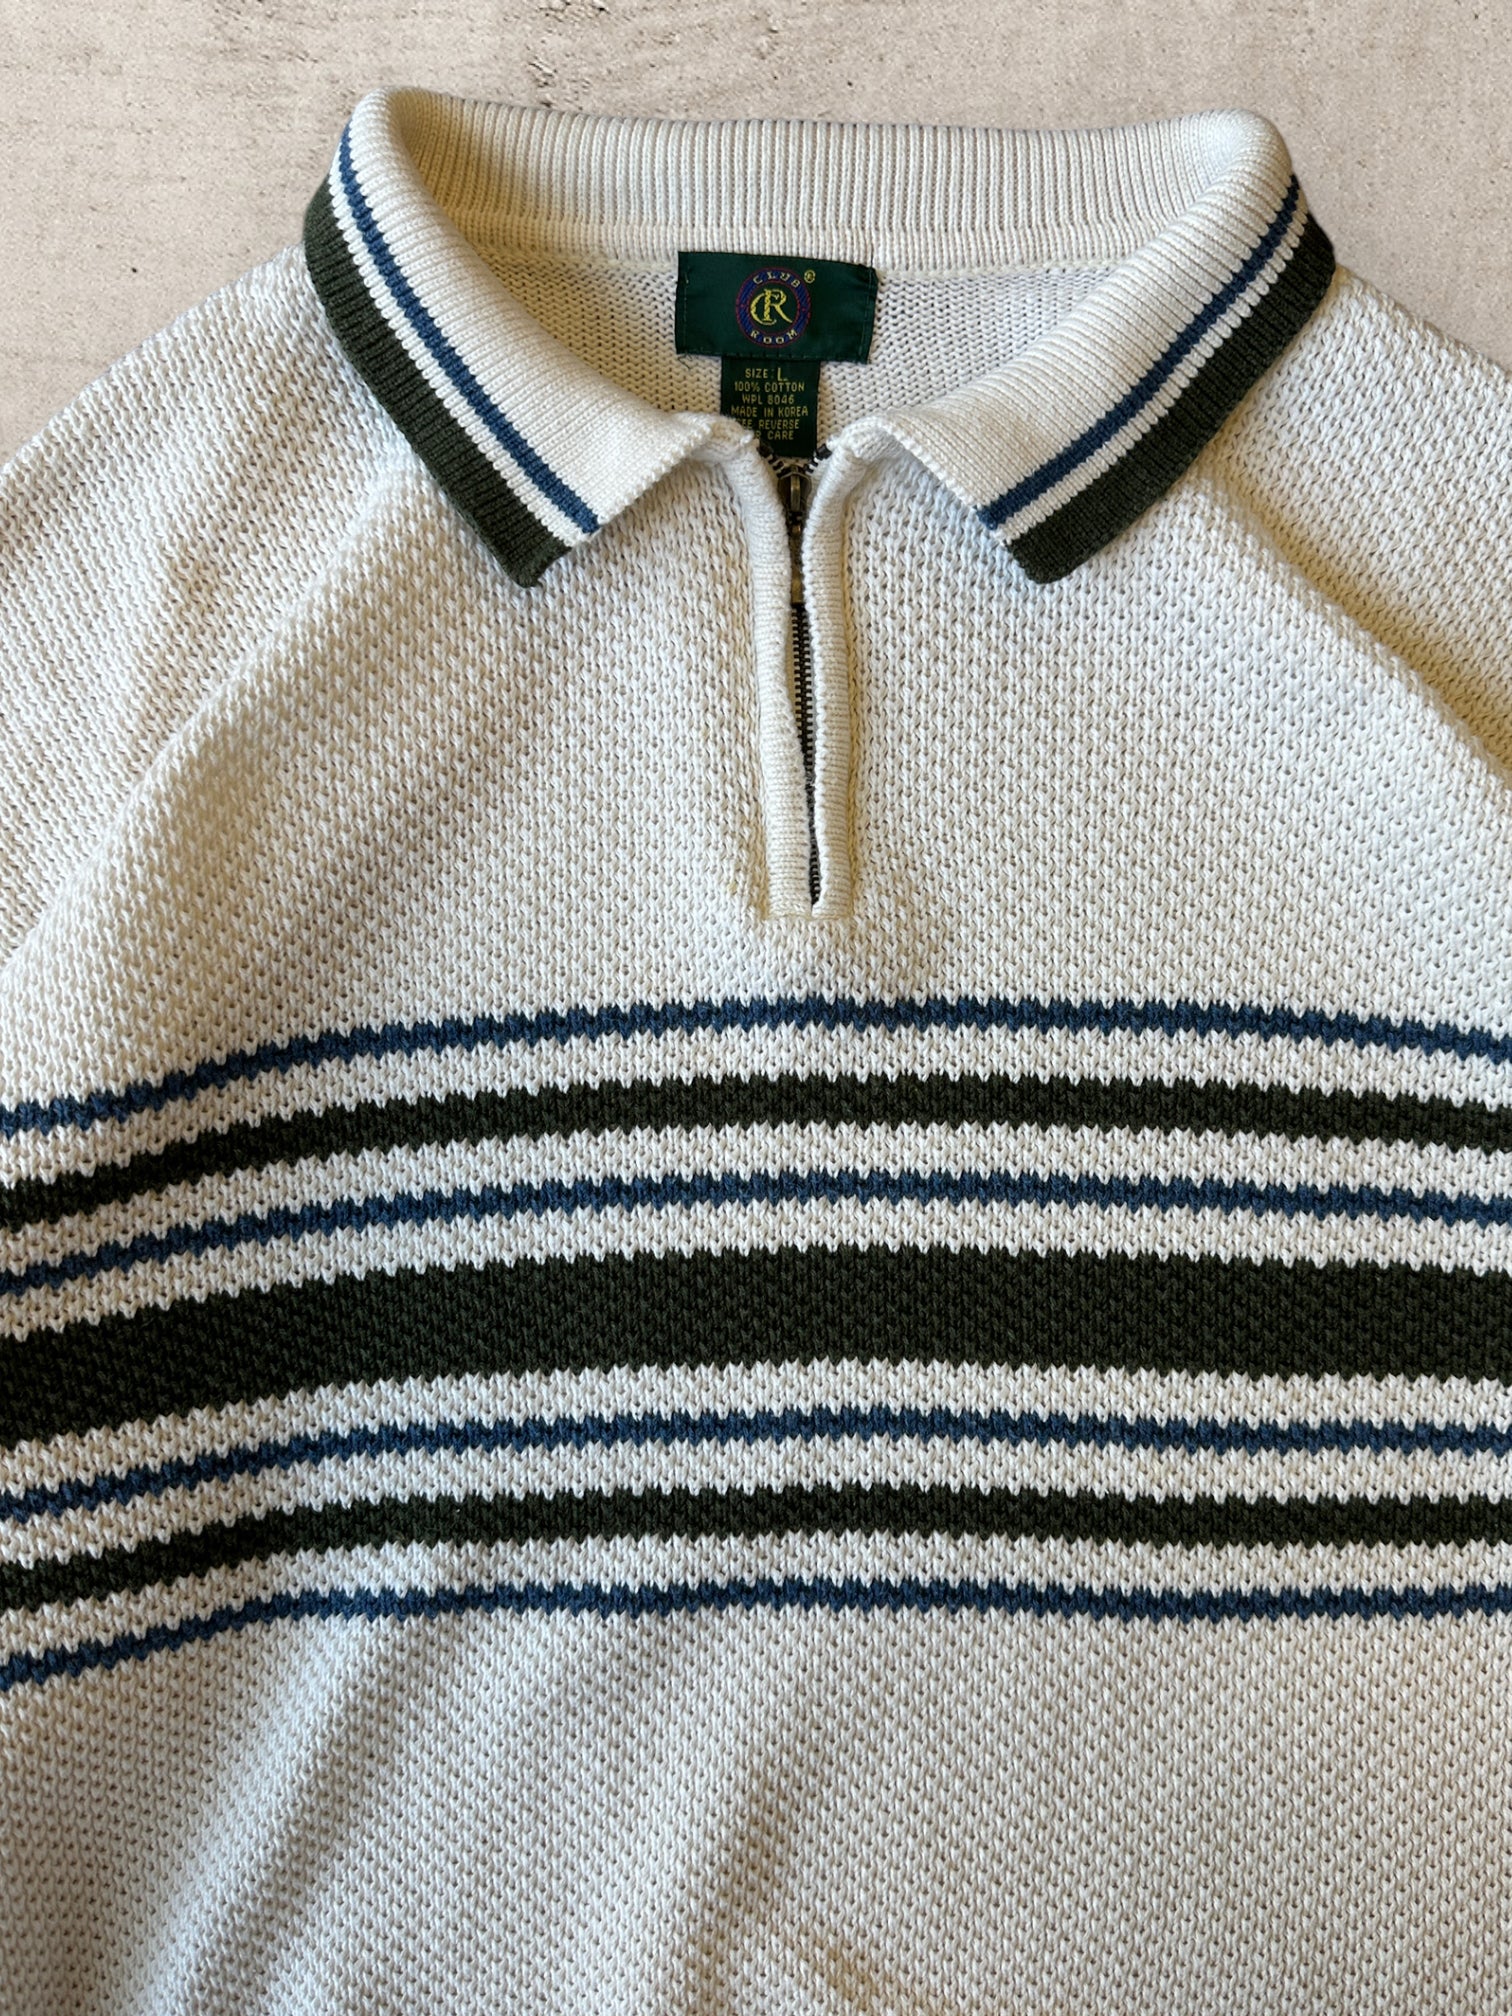 00s Clubroom Striped 1/4 Zip Knit Sweater - Large